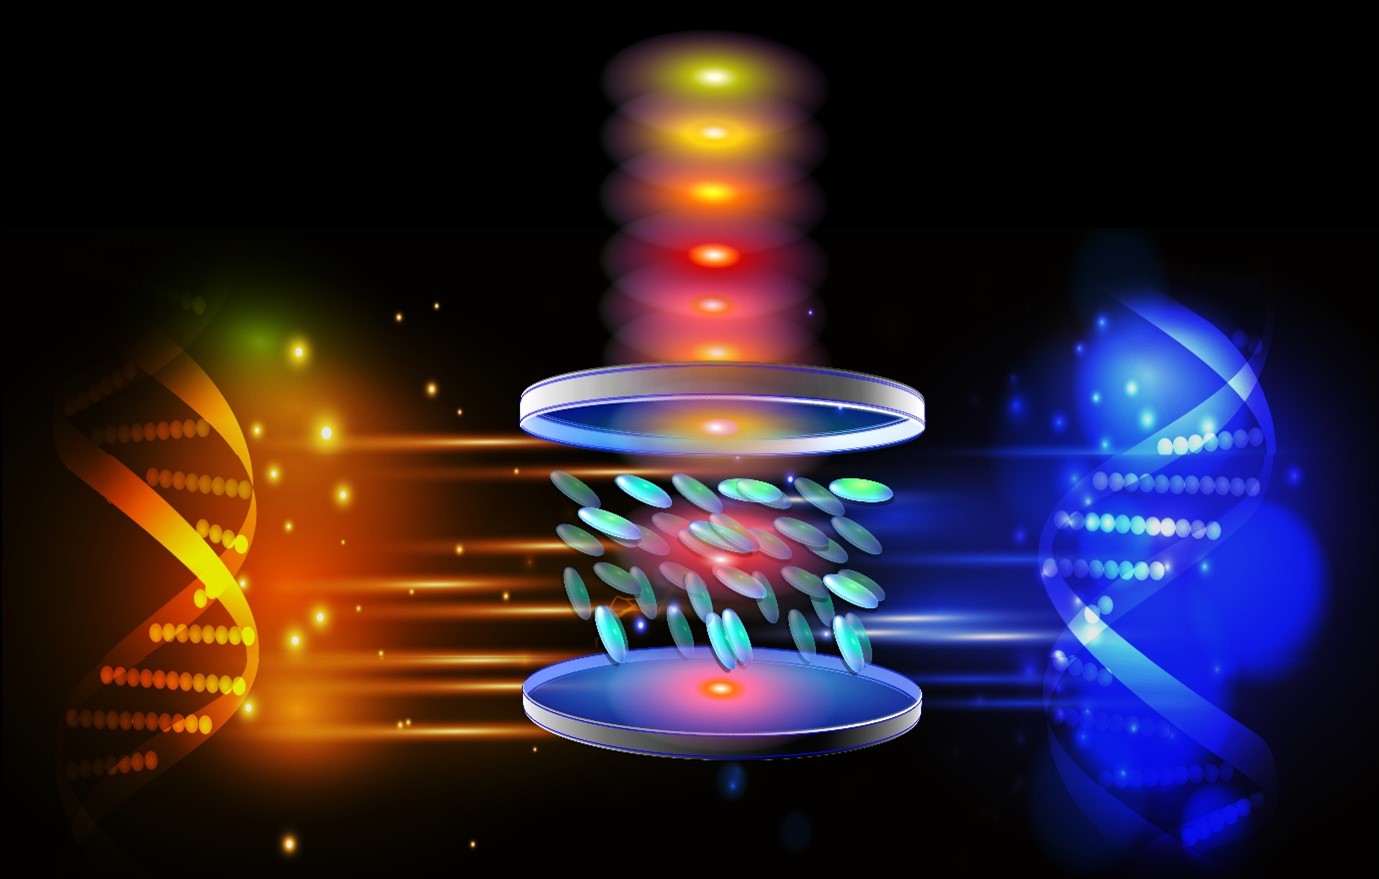 An artistic representation of using DNA to control lasers